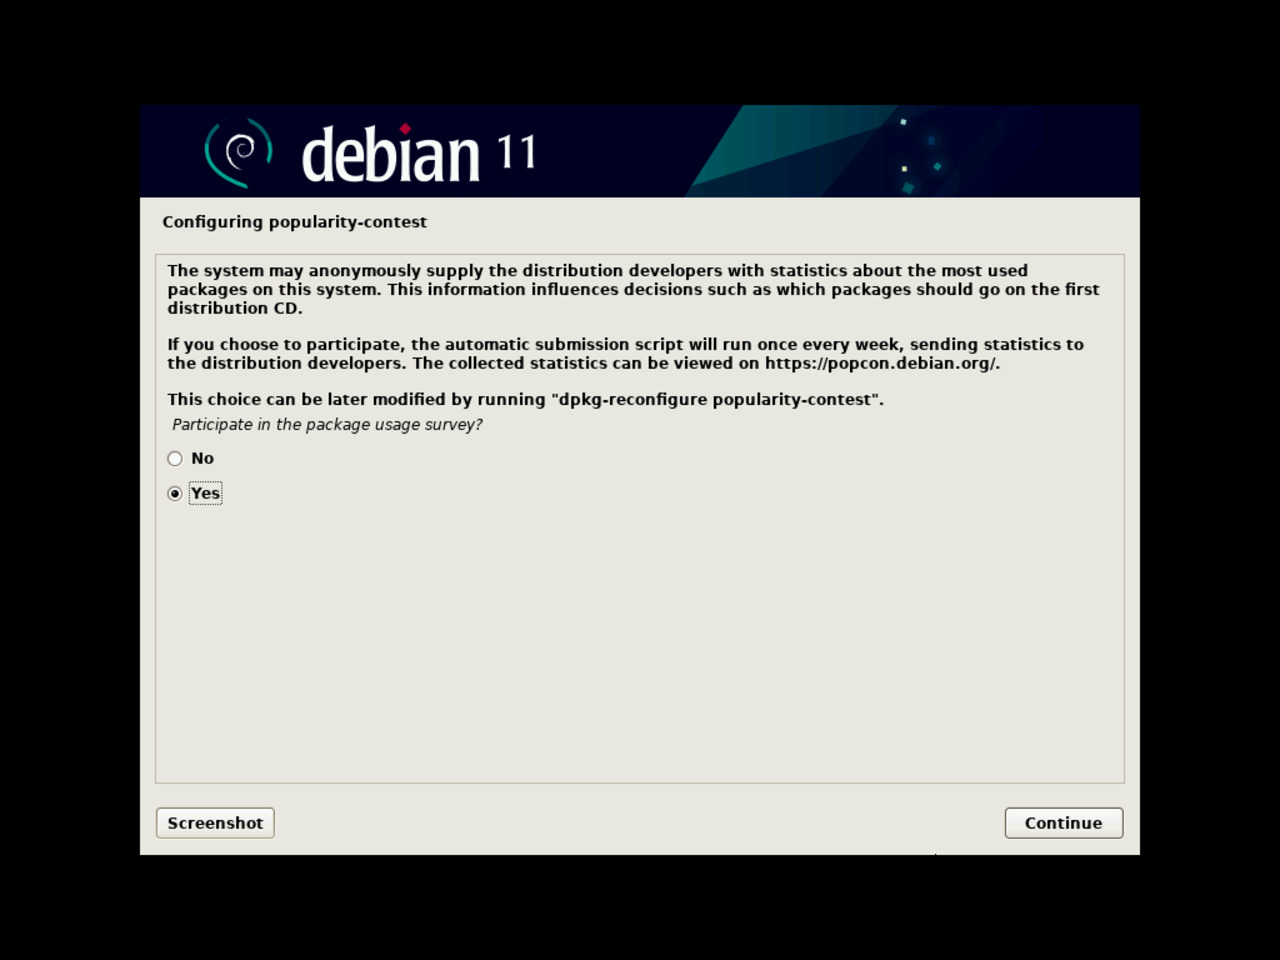 My first Linux laptop - Choose about participating to the popcon Debian package usage survey during installation